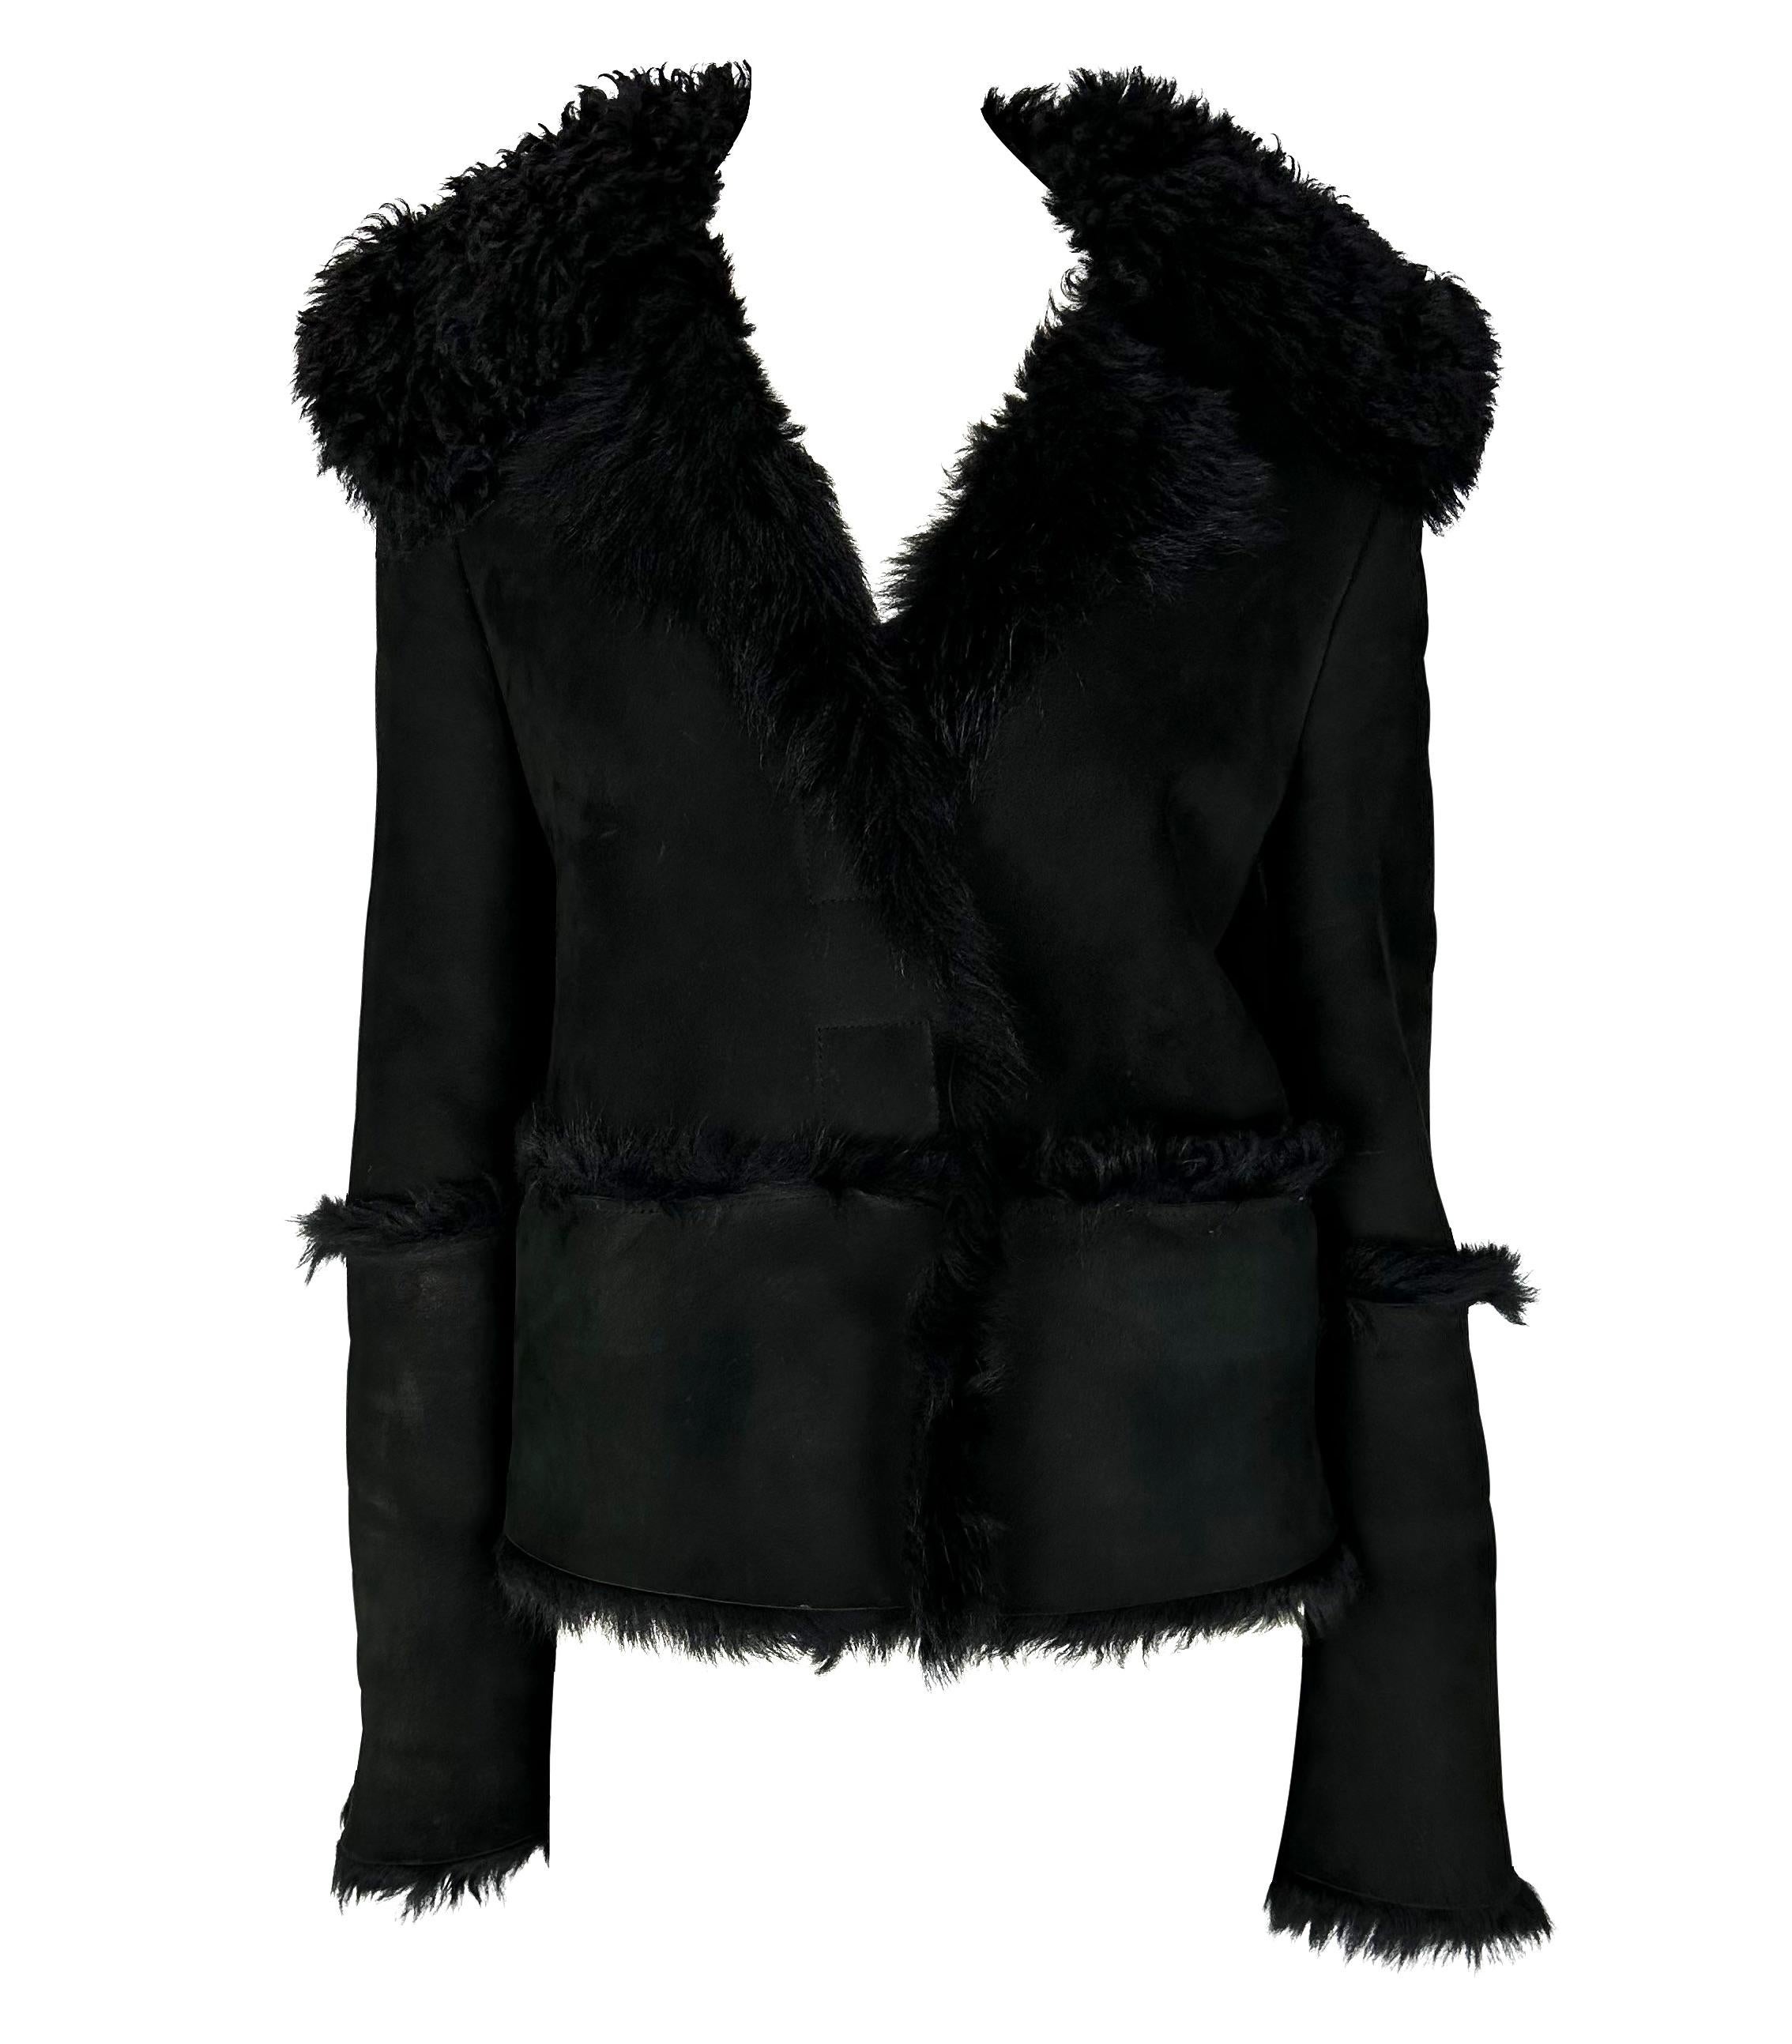 Presenting a fabulous black shearling Gucci oversized moto jacket, designed by Tom Ford. From the early 2000s, this winter weather essential is constructed entirely of shearling with a thick fur lining. The fur on this jacket peaks out at the seams